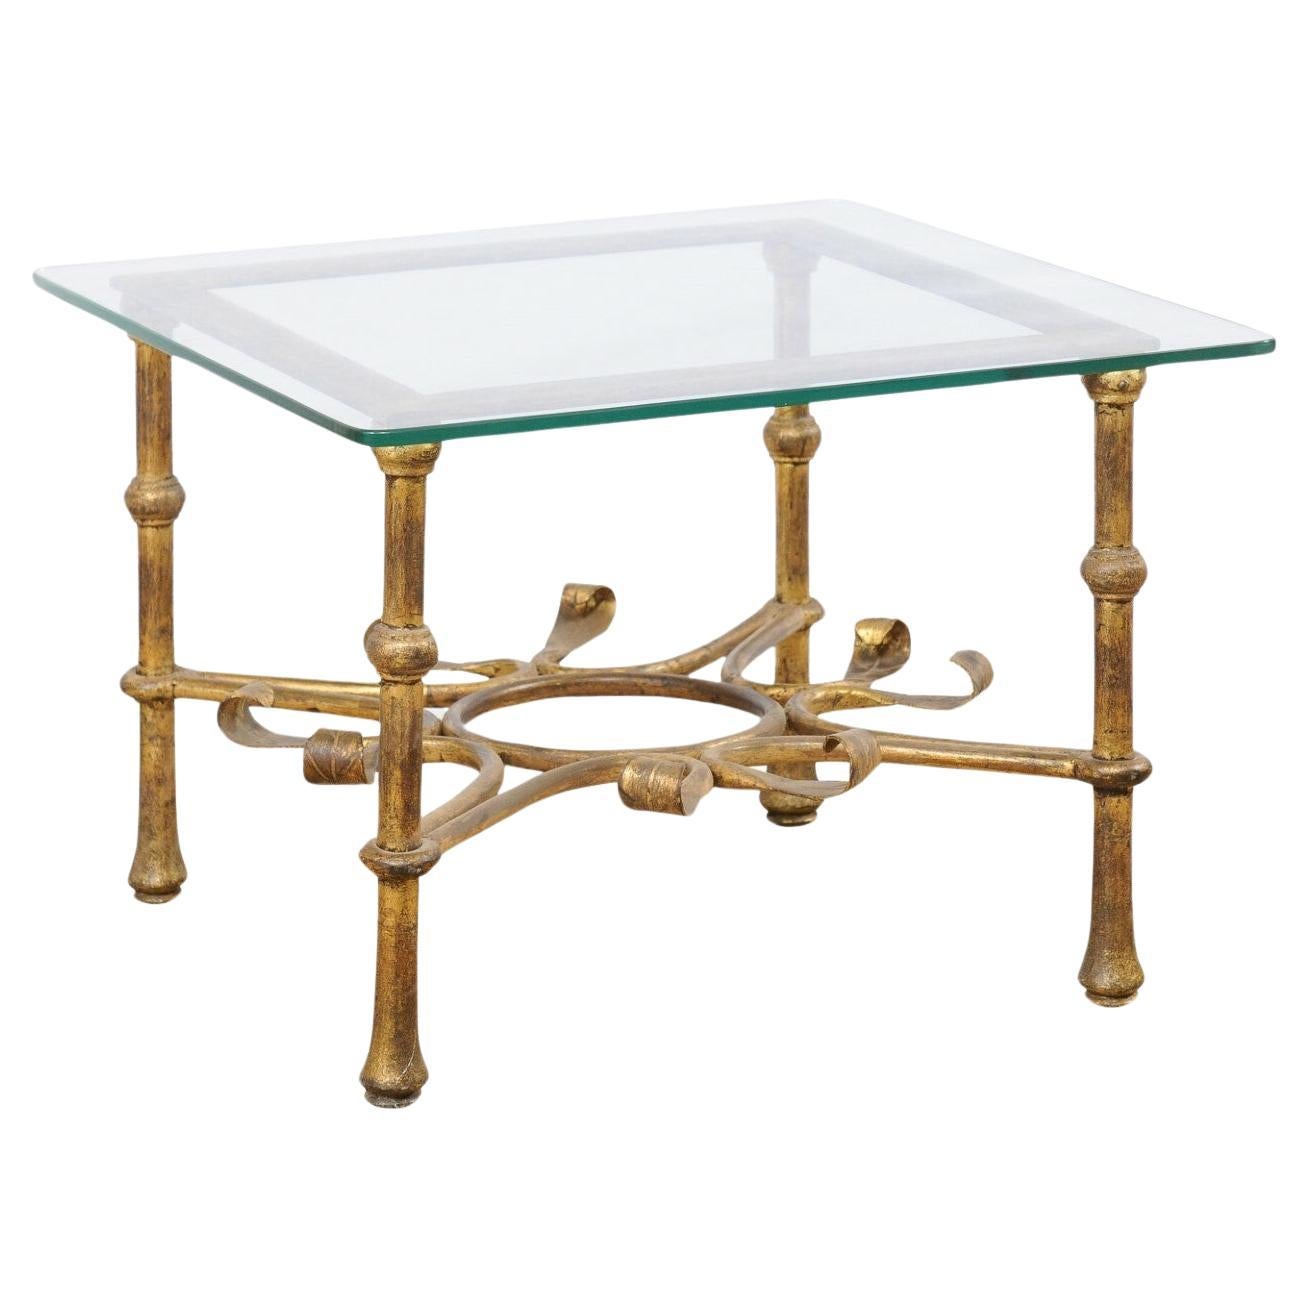 Spanish Accent Table, Square w/Glass Top